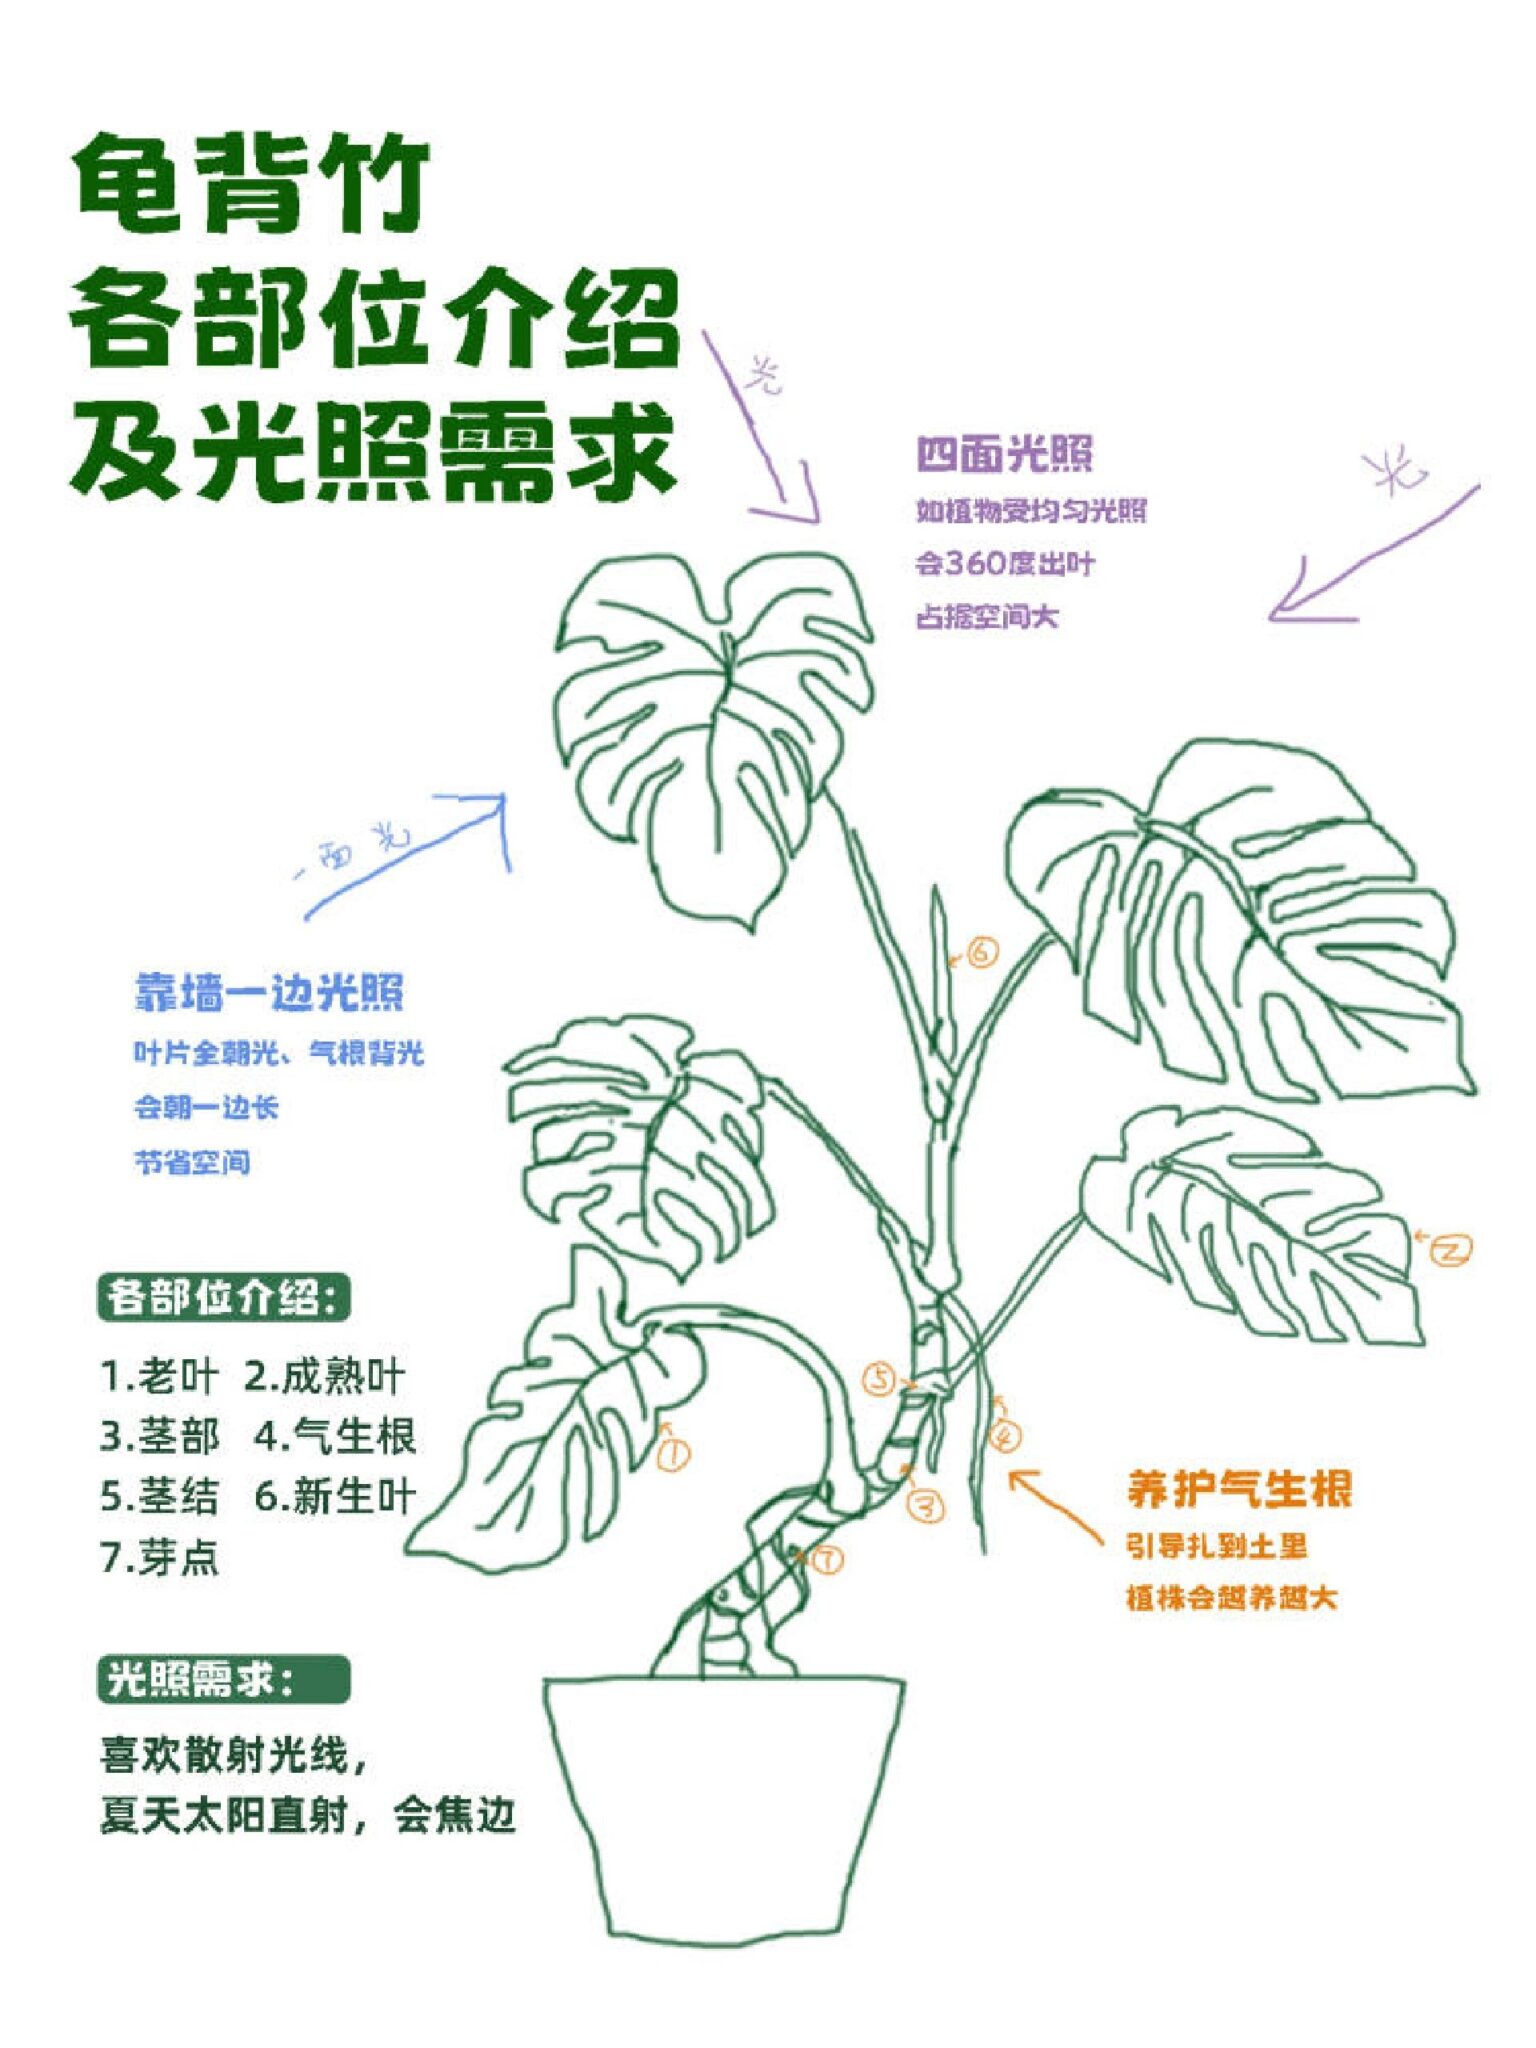 How to Care for a Monstera Plant: A Visual Guide to Light, Watering, and Growth 如何照顾龟背竹植物：光照、浇水和生长的视觉指南